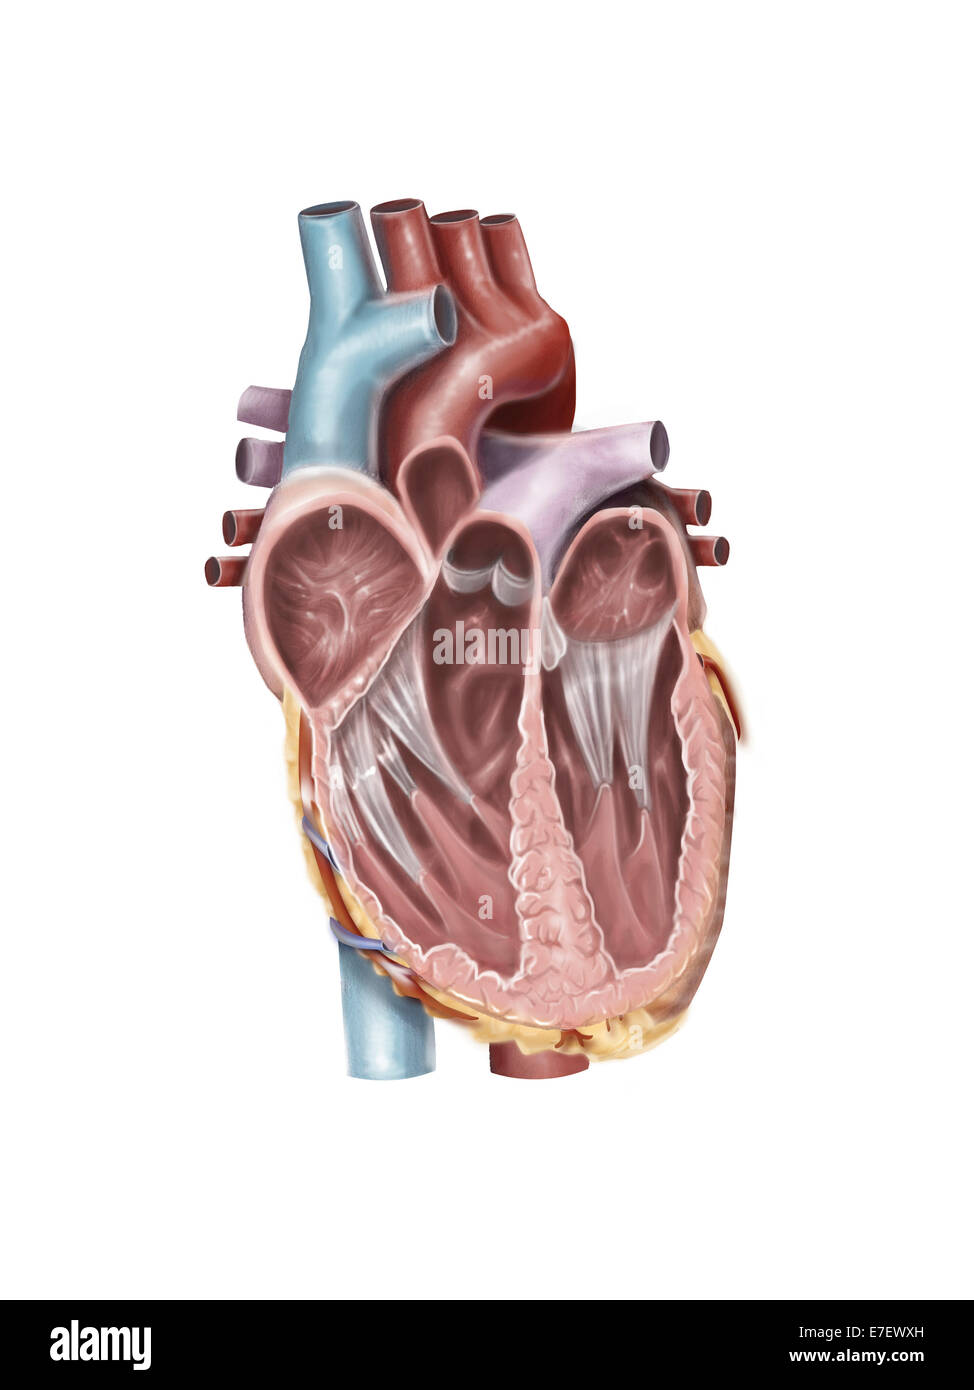 Internal View Of The Human Heart Stock Photo 73471737 Alamy